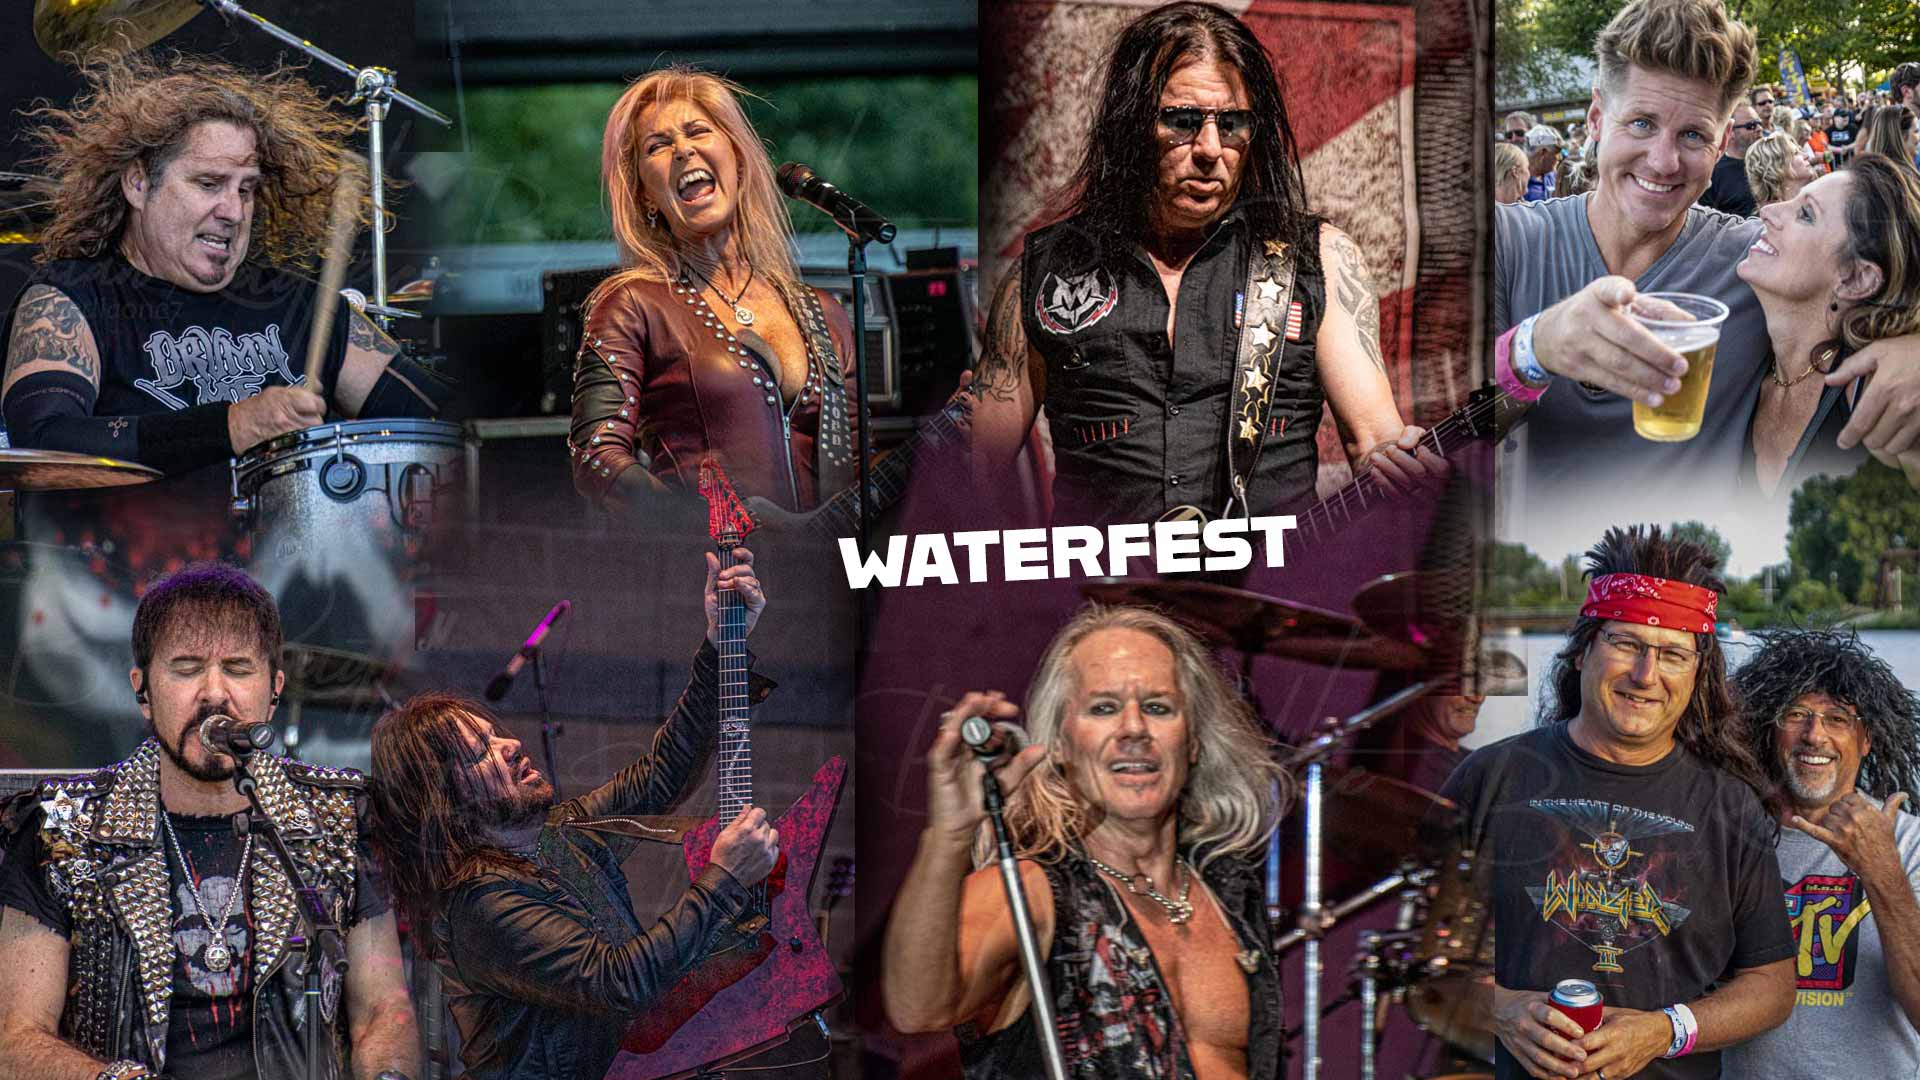 Waterfest with Fire House, Lita Ford and Warrant Bands